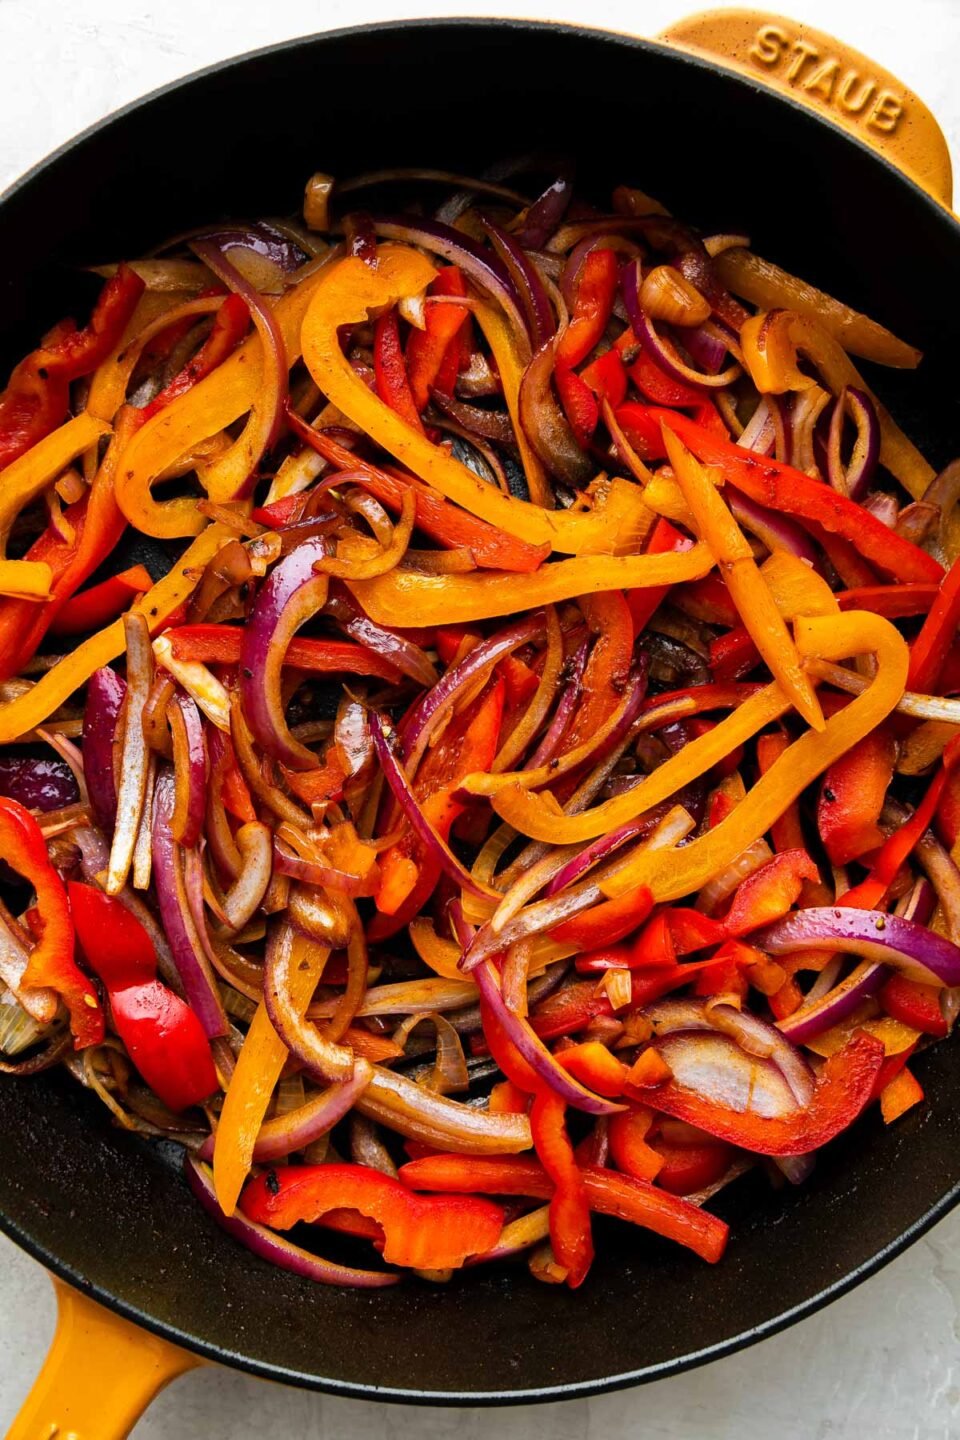 How to make chicken fajita burritos, step 4: Cook the fajita veggies. Sliced bell Peppers. & onions fill a Yellow Staub cast iron skillet. The fajita veggies have been cooked in oil & seasoned with kosher salt and ground black pepper. The skillet sits atop a creamy white textured surface.